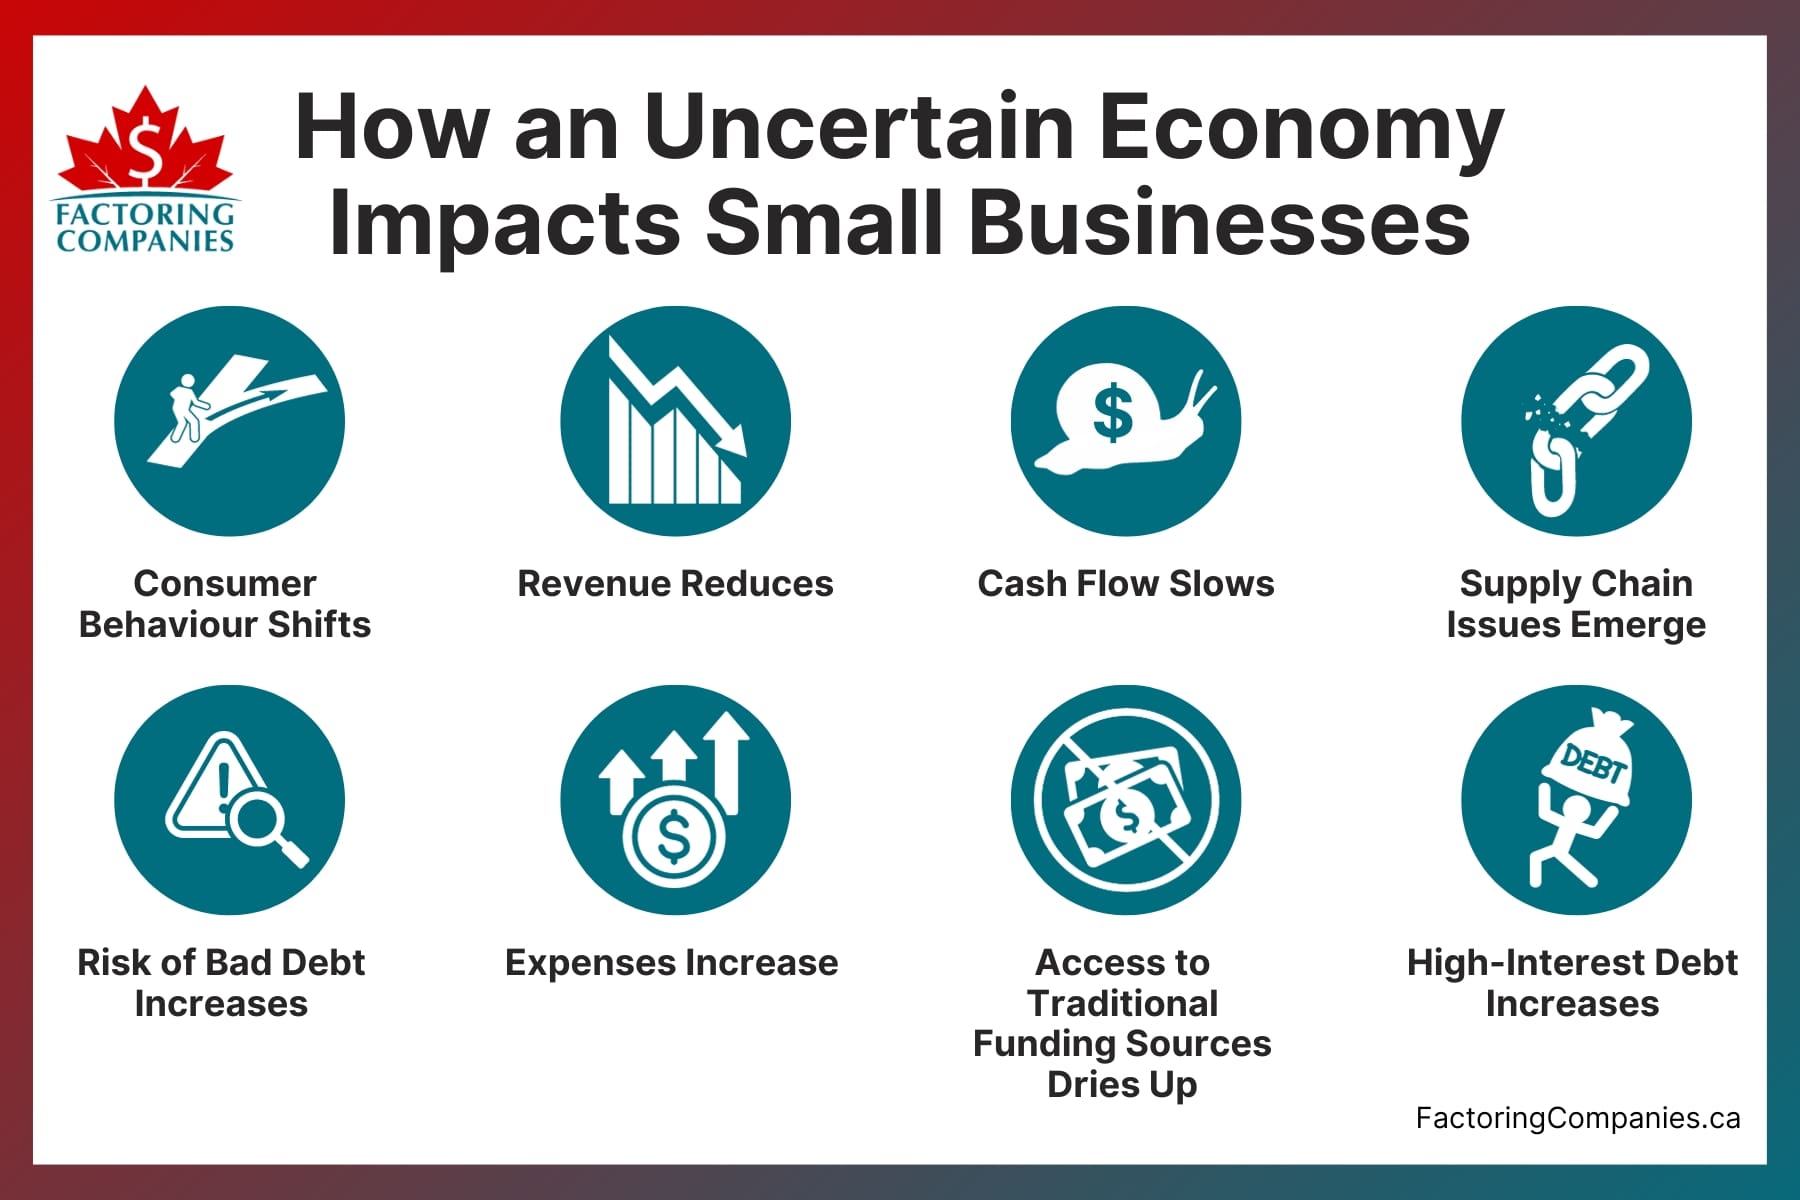 How an uncertain economy impacts small businesses